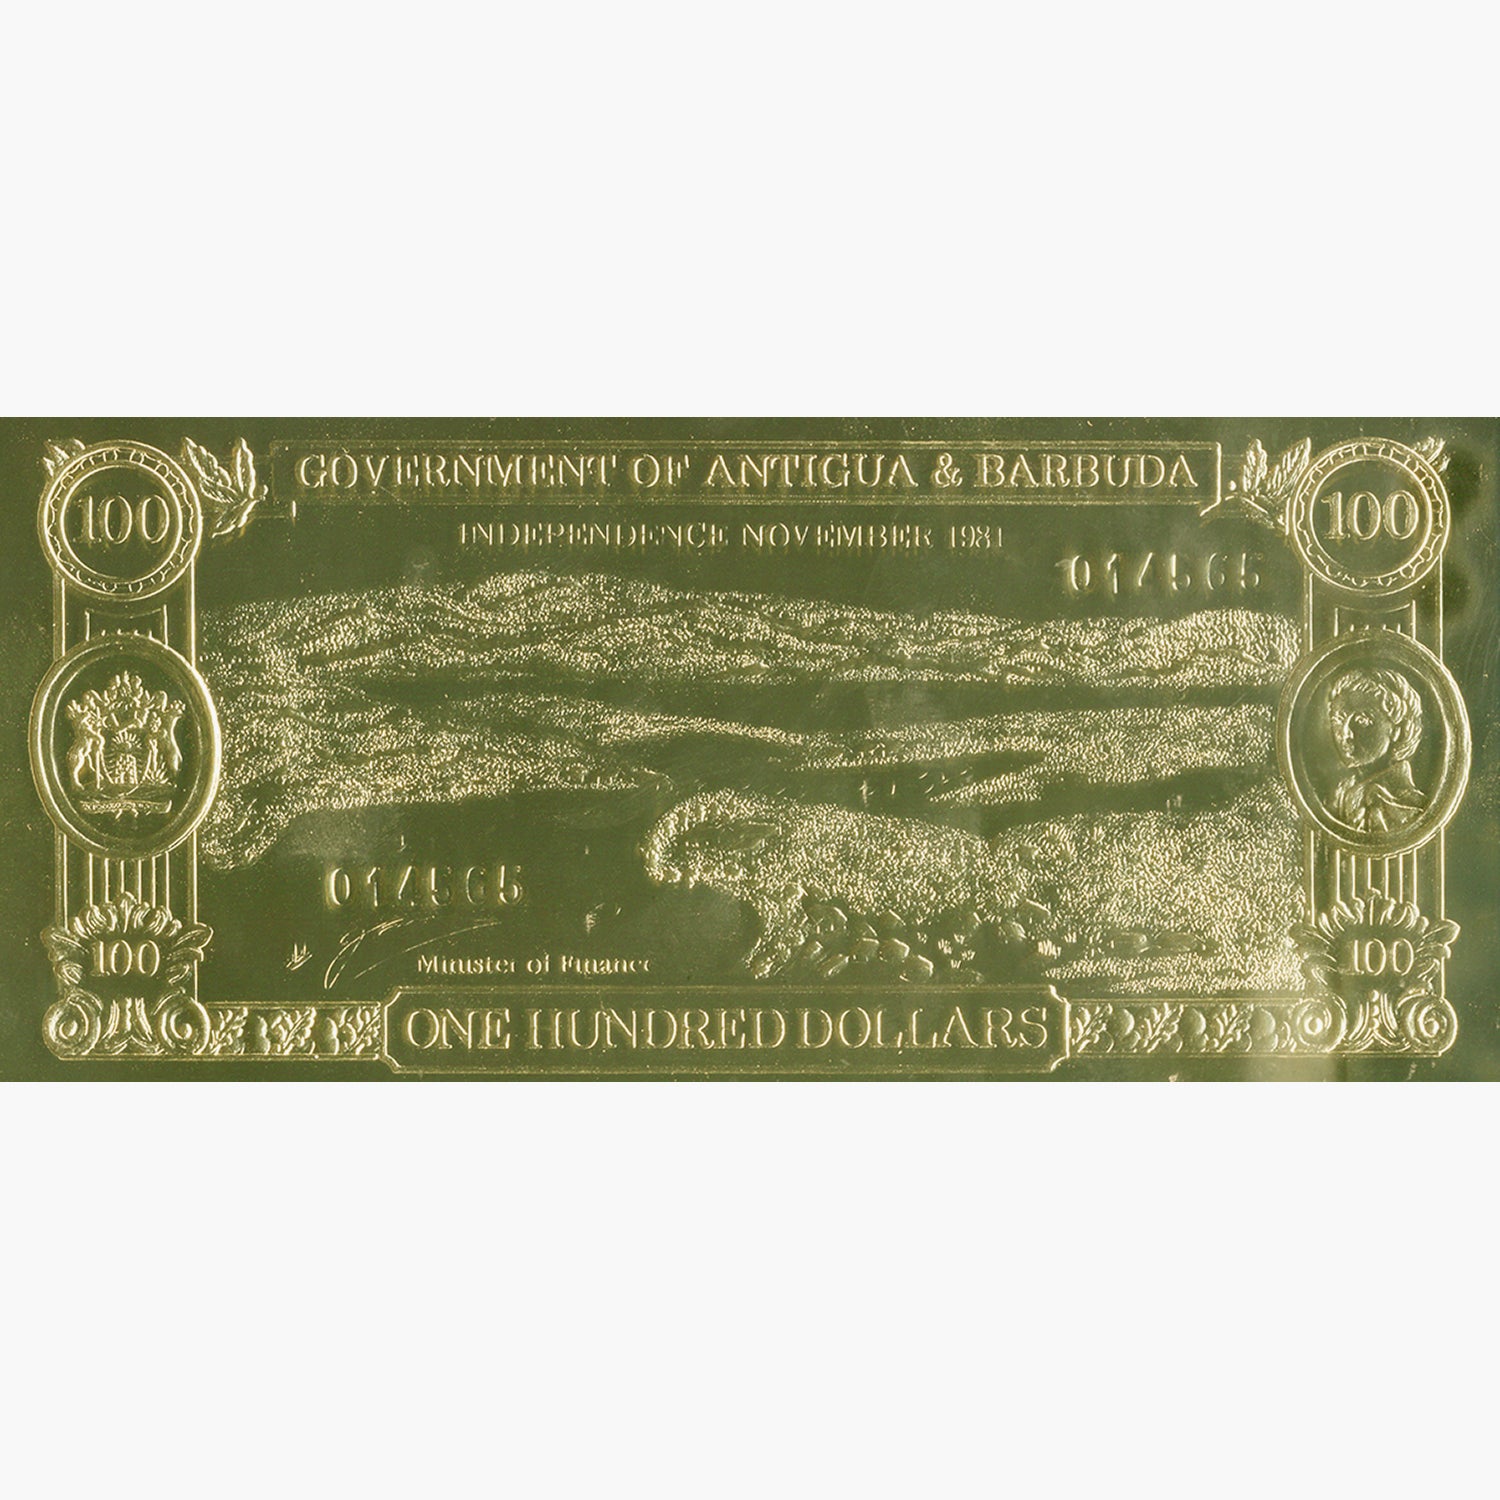 Gold and Silver Ship Banknote